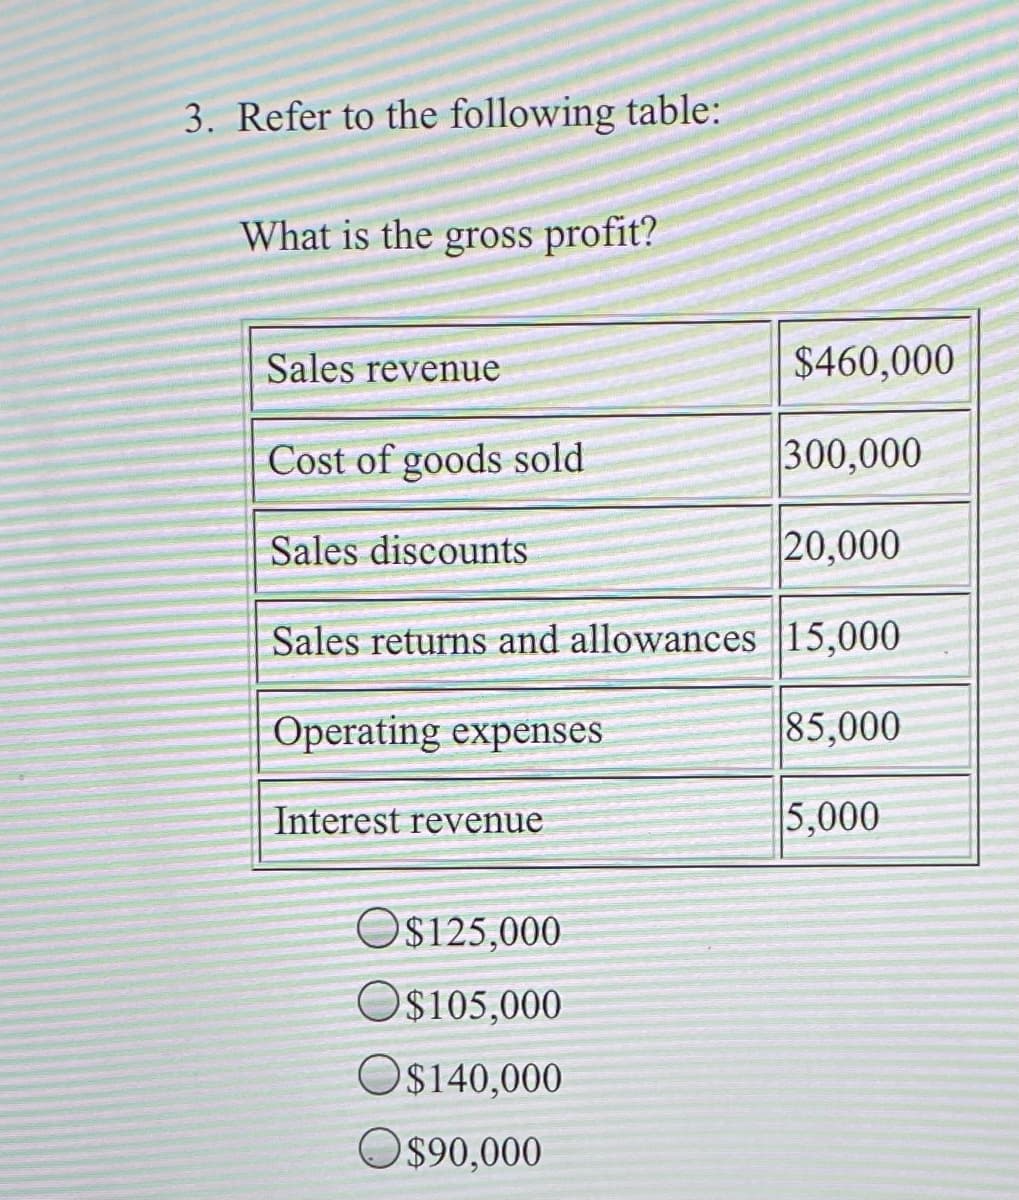 3. Refer to the following table:
What is the gross profit?
Sales revenue
$460,000
Cost of goods sold
300,000
Sales discounts
20,000
Sales returns and allowances 15,000
Operating expenses
85,000
Interest revenue
5,000
O$125,000
O$105,000
O$140,000
O$90,000
